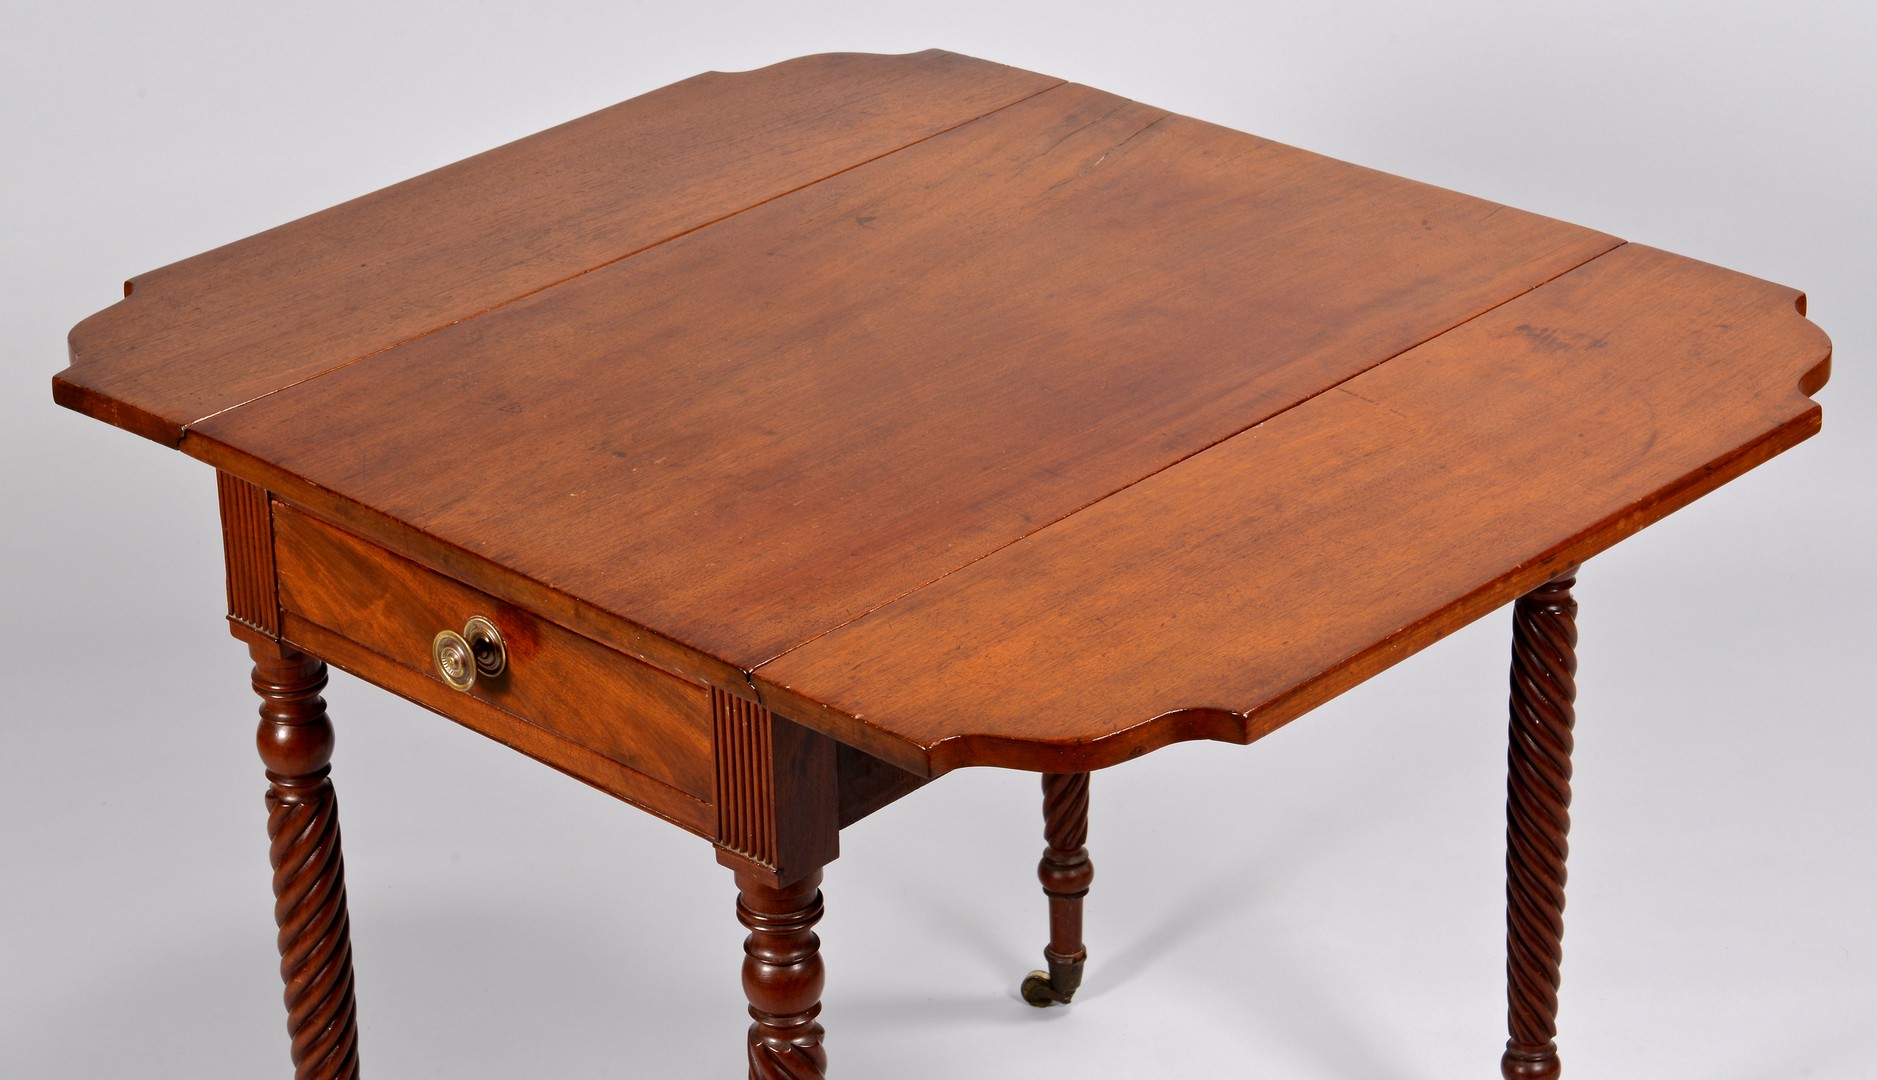 Lot 308: Southern Pembroke Table with Spiral Tapered Legs,